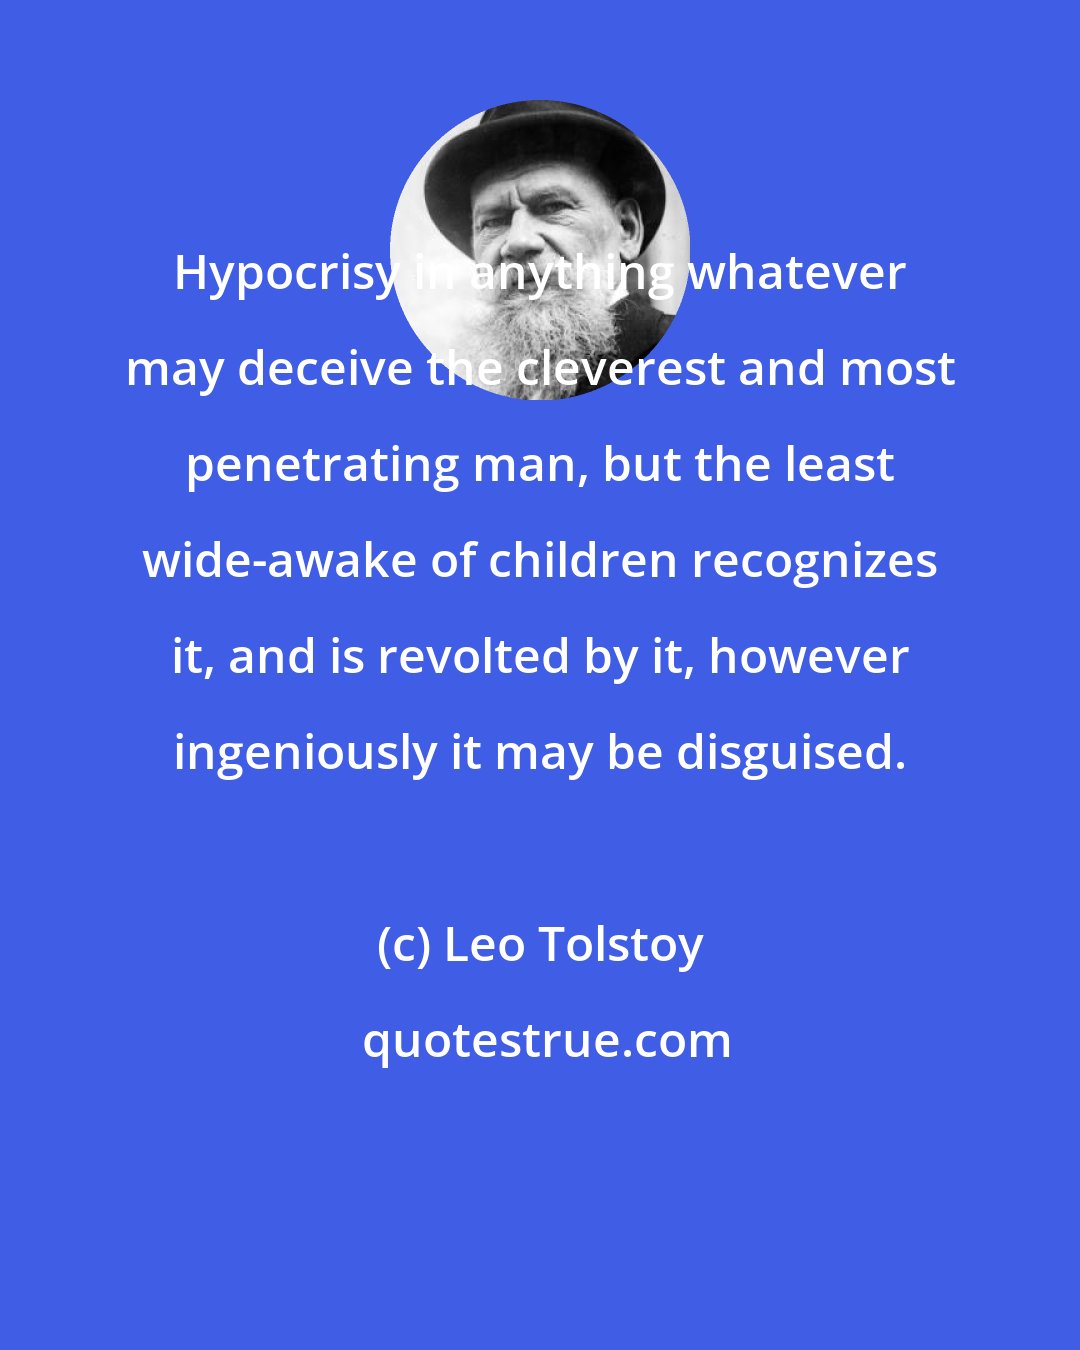 Leo Tolstoy: Hypocrisy in anything whatever may deceive the cleverest and most penetrating man, but the least wide-awake of children recognizes it, and is revolted by it, however ingeniously it may be disguised.